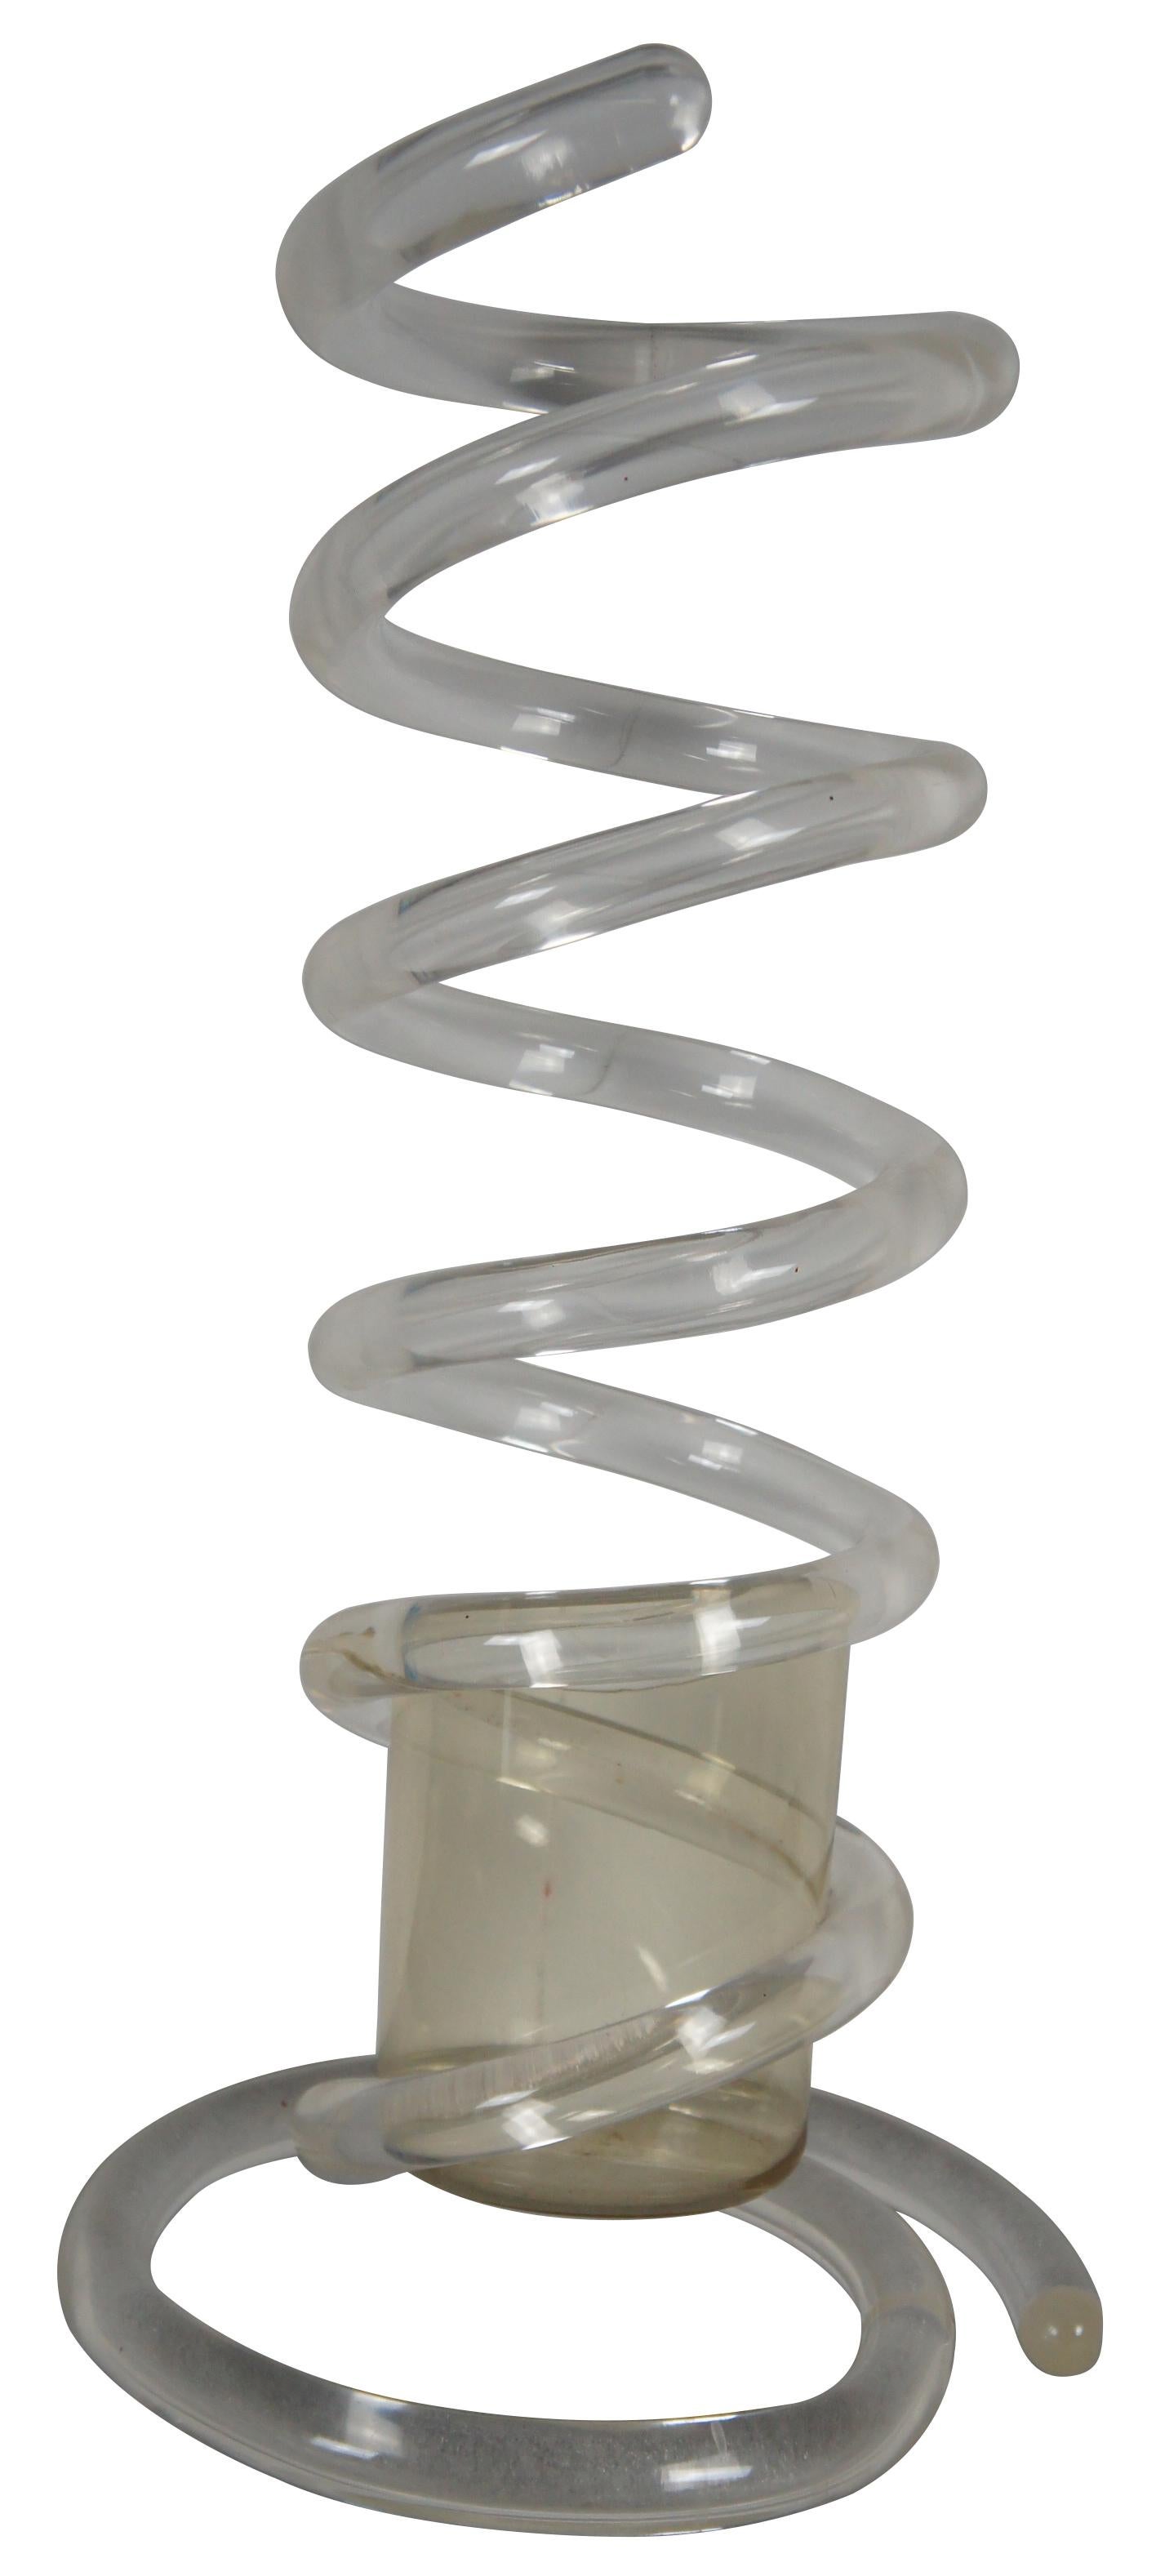 Vintage tubular lucite spiral umbrella stand or cane holder by Dorothy Thorpe.

Measures: 11.5” x 24” / Cup Diameter – 4.75” (Diameter x Height).